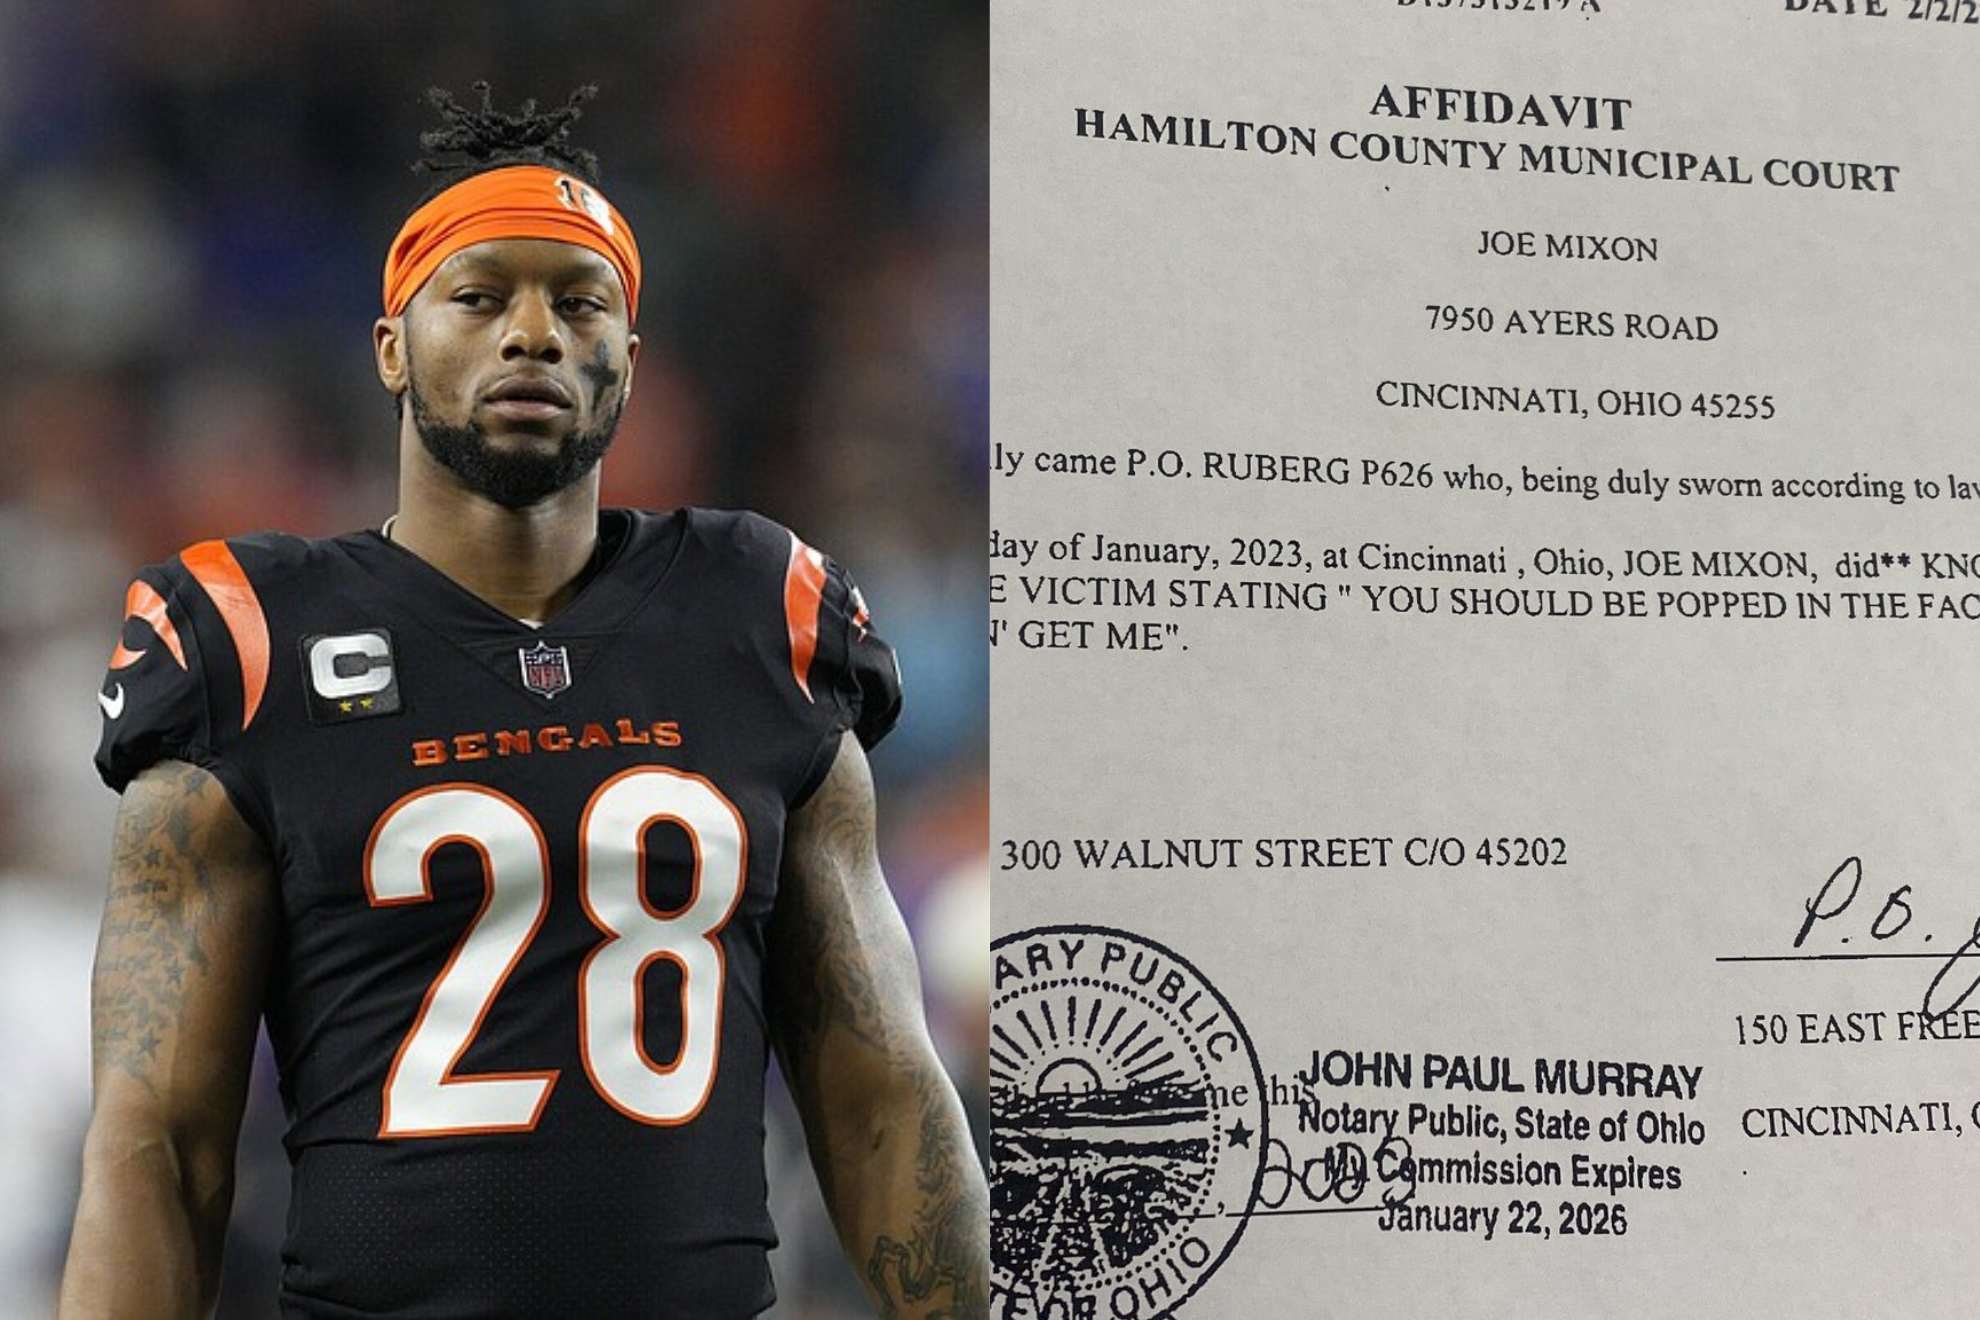 Joe Mixon has a warrant out for his arrest on one count of aggravated menacing.